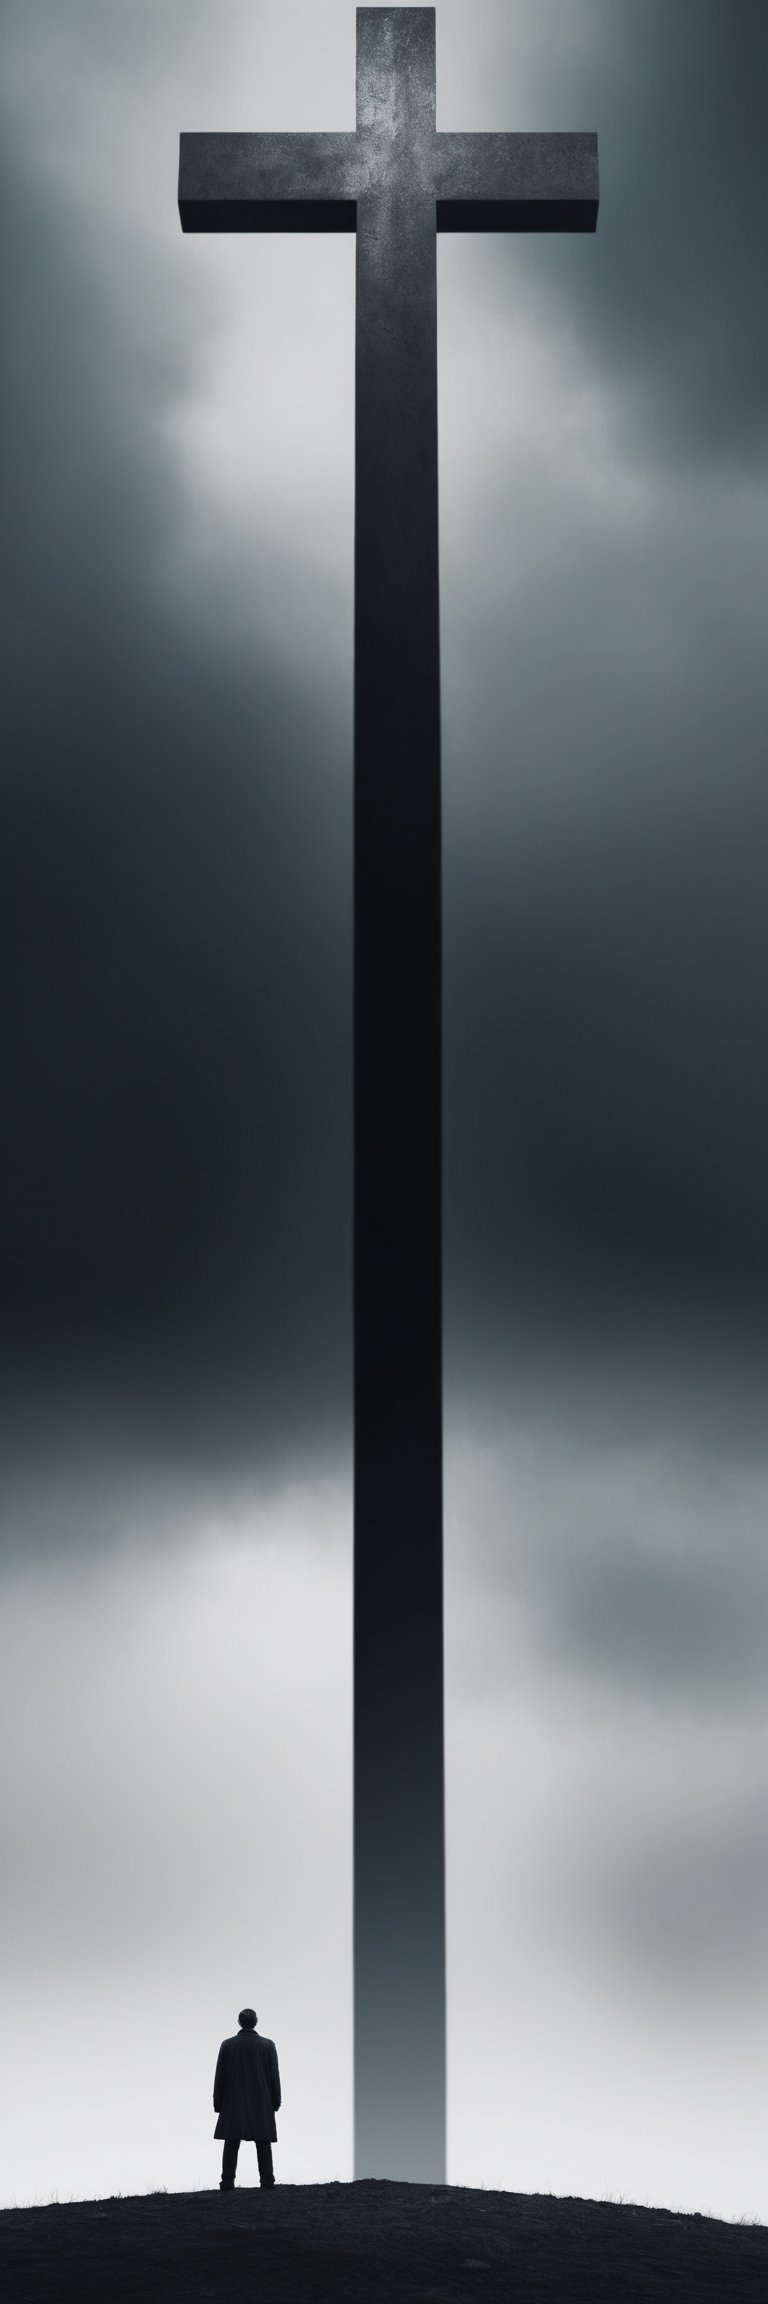 A depressing man, a hellish landscape, depressing dark colors, a huge and heavy steel cross on the man's back, a cross that reaches up to the sky with no visible head!